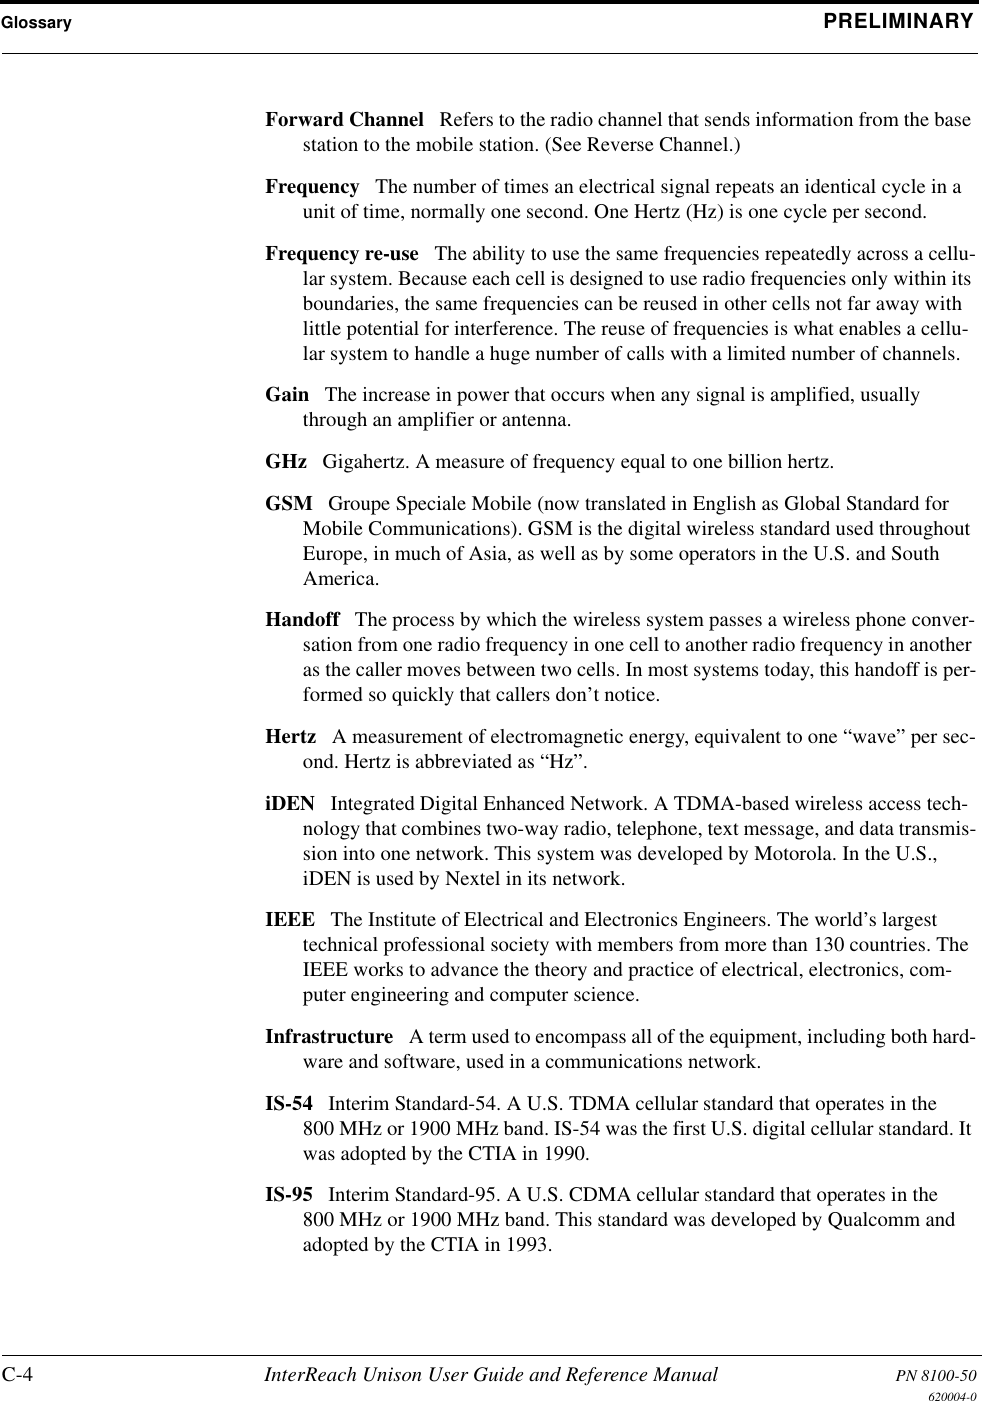 Glossary PRELIMINARYC-4 InterReach Unison User Guide and Reference Manual PN 8100-50620004-0Forward Channel Refers to the radio channel that sends information from the base station to the mobile station. (See Reverse Channel.) Frequency The number of times an electrical signal repeats an identical cycle in a unit of time, normally one second. One Hertz (Hz) is one cycle per second. Frequency re-use The ability to use the same frequencies repeatedly across a cellu-lar system. Because each cell is designed to use radio frequencies only within its boundaries, the same frequencies can be reused in other cells not far away with little potential for interference. The reuse of frequencies is what enables a cellu-lar system to handle a huge number of calls with a limited number of channels. Gain The increase in power that occurs when any signal is amplified, usually through an amplifier or antenna. GHz Gigahertz. A measure of frequency equal to one billion hertz. GSM Groupe Speciale Mobile (now translated in English as Global Standard for Mobile Communications). GSM is the digital wireless standard used throughout Europe, in much of Asia, as well as by some operators in the U.S. and South America. Handoff The process by which the wireless system passes a wireless phone conver-sation from one radio frequency in one cell to another radio frequency in another as the caller moves between two cells. In most systems today, this handoff is per-formed so quickly that callers don’t notice. Hertz A measurement of electromagnetic energy, equivalent to one “wave” per sec-ond. Hertz is abbreviated as “Hz”. iDEN Integrated Digital Enhanced Network. A TDMA-based wireless access tech-nology that combines two-way radio, telephone, text message, and data transmis-sion into one network. This system was developed by Motorola. In the U.S., iDEN is used by Nextel in its network. IEEE The Institute of Electrical and Electronics Engineers. The world’s largest technical professional society with members from more than 130 countries. The IEEE works to advance the theory and practice of electrical, electronics, com-puter engineering and computer science. Infrastructure A term used to encompass all of the equipment, including both hard-ware and software, used in a communications network. IS-54 Interim Standard-54. A U.S. TDMA cellular standard that operates in the 800 MHz or 1900 MHz band. IS-54 was the first U.S. digital cellular standard. It was adopted by the CTIA in 1990. IS-95 Interim Standard-95. A U.S. CDMA cellular standard that operates in the 800 MHz or 1900 MHz band. This standard was developed by Qualcomm and adopted by the CTIA in 1993. 